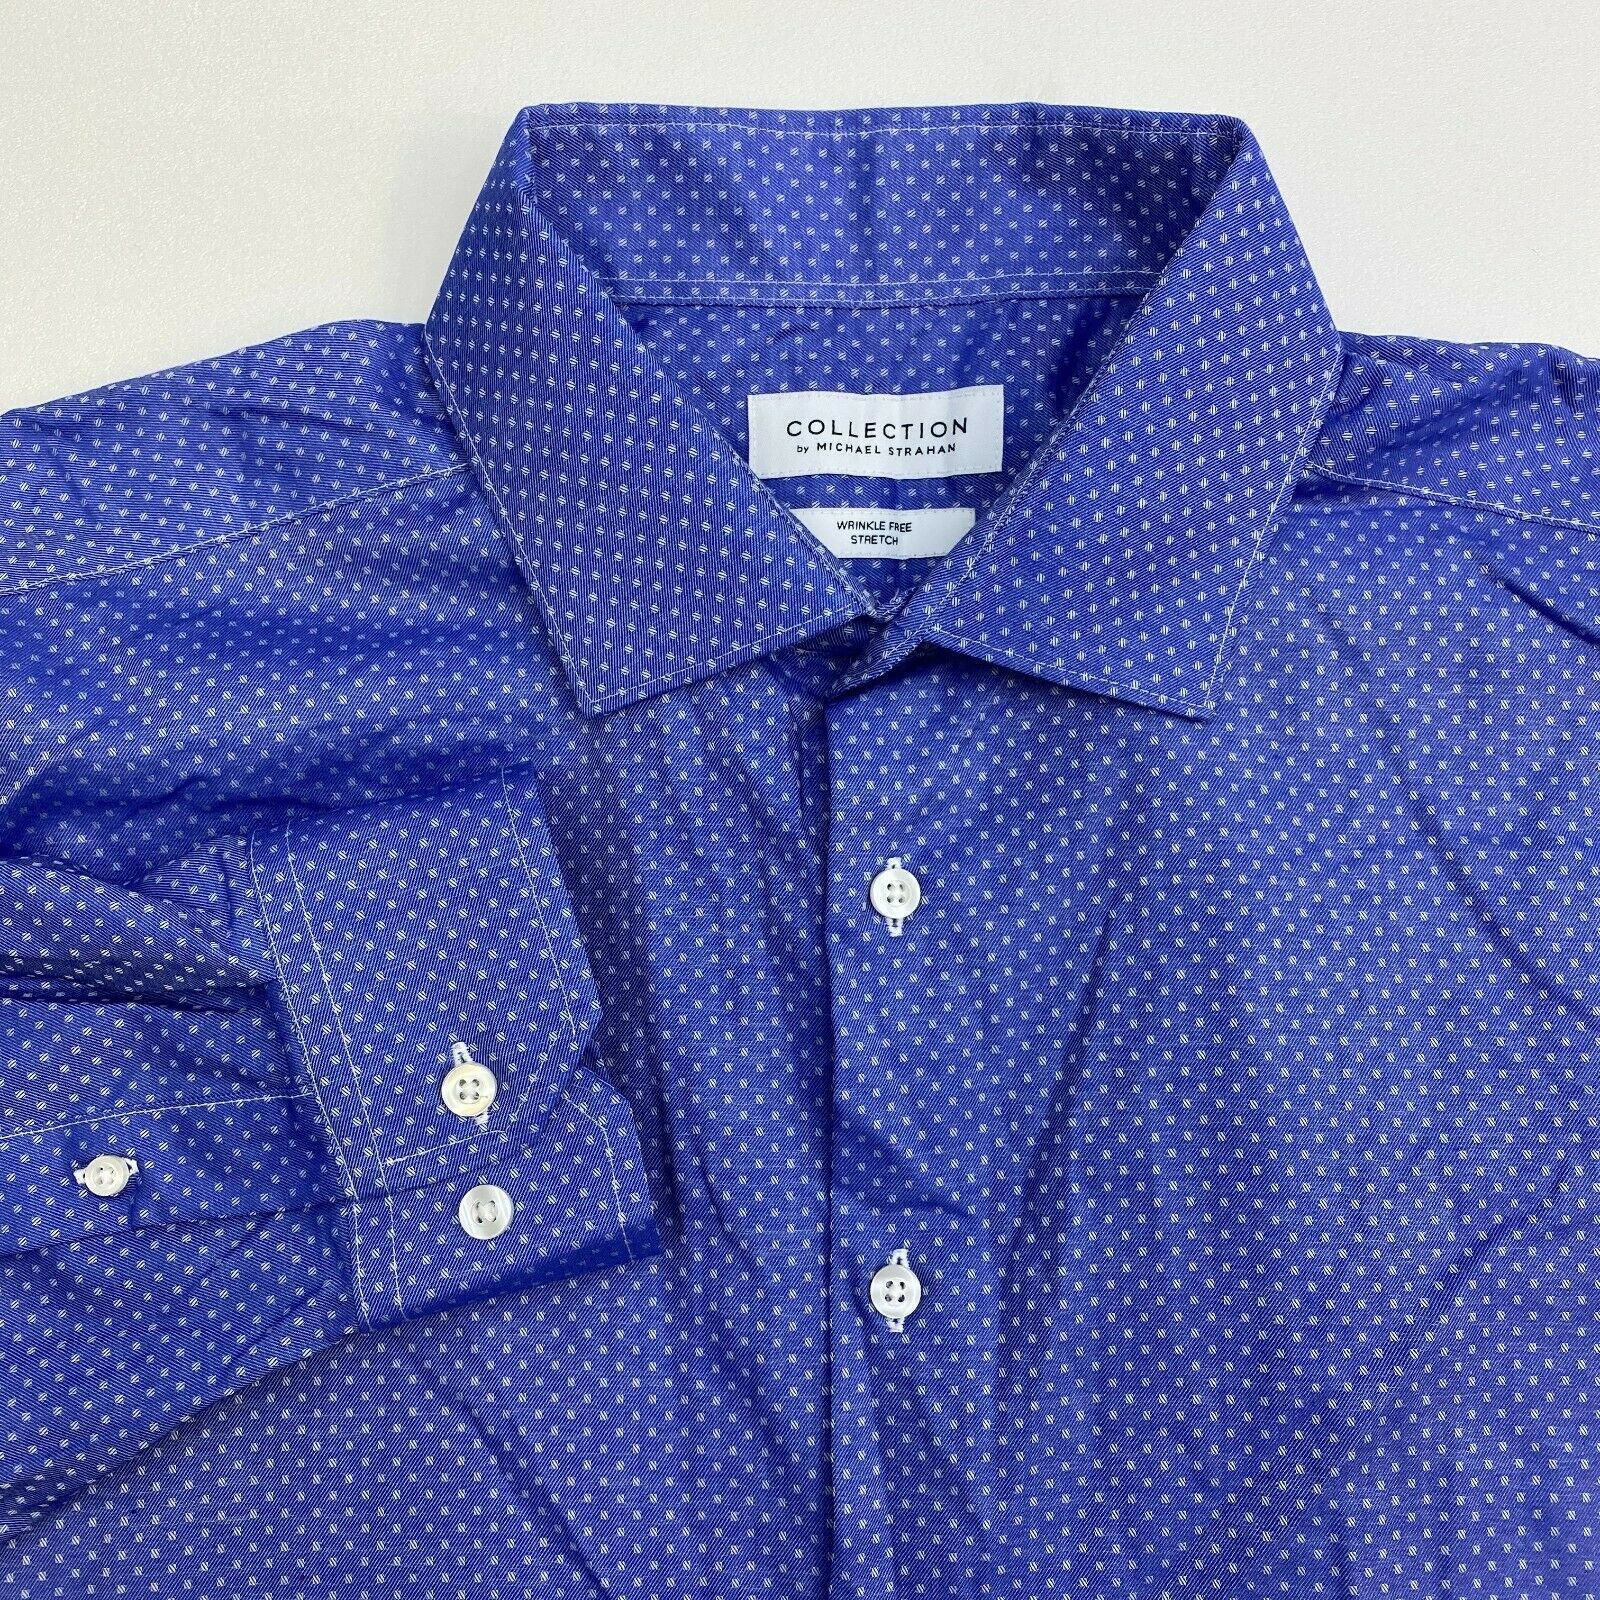 Collection by Michael Strahan Button Up Shirt Mens 18 34/35 Blue ...